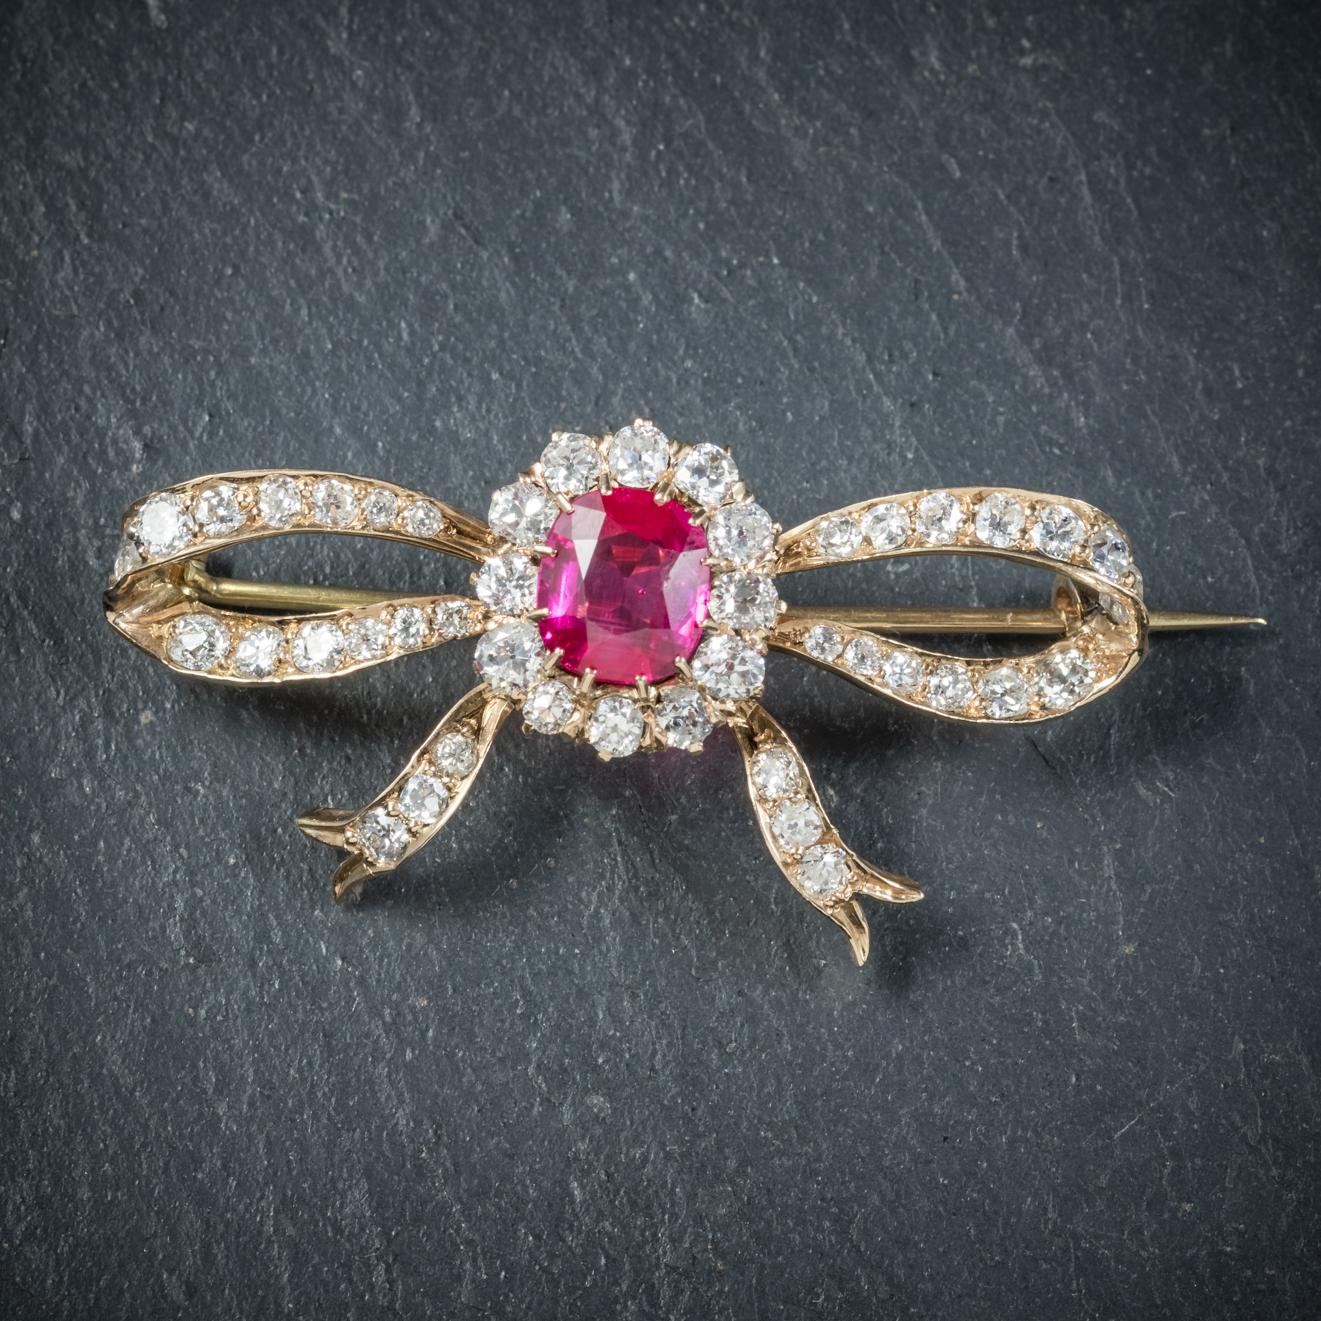 This outstanding high quality antique Verneuil Ruby and Diamond brooch is Edwardian, Circa 1910

This is a stunning 2.50ct Verneuil Ruby. Although produced by the Verneuil process, these stones are chemically and physically equivalent to their